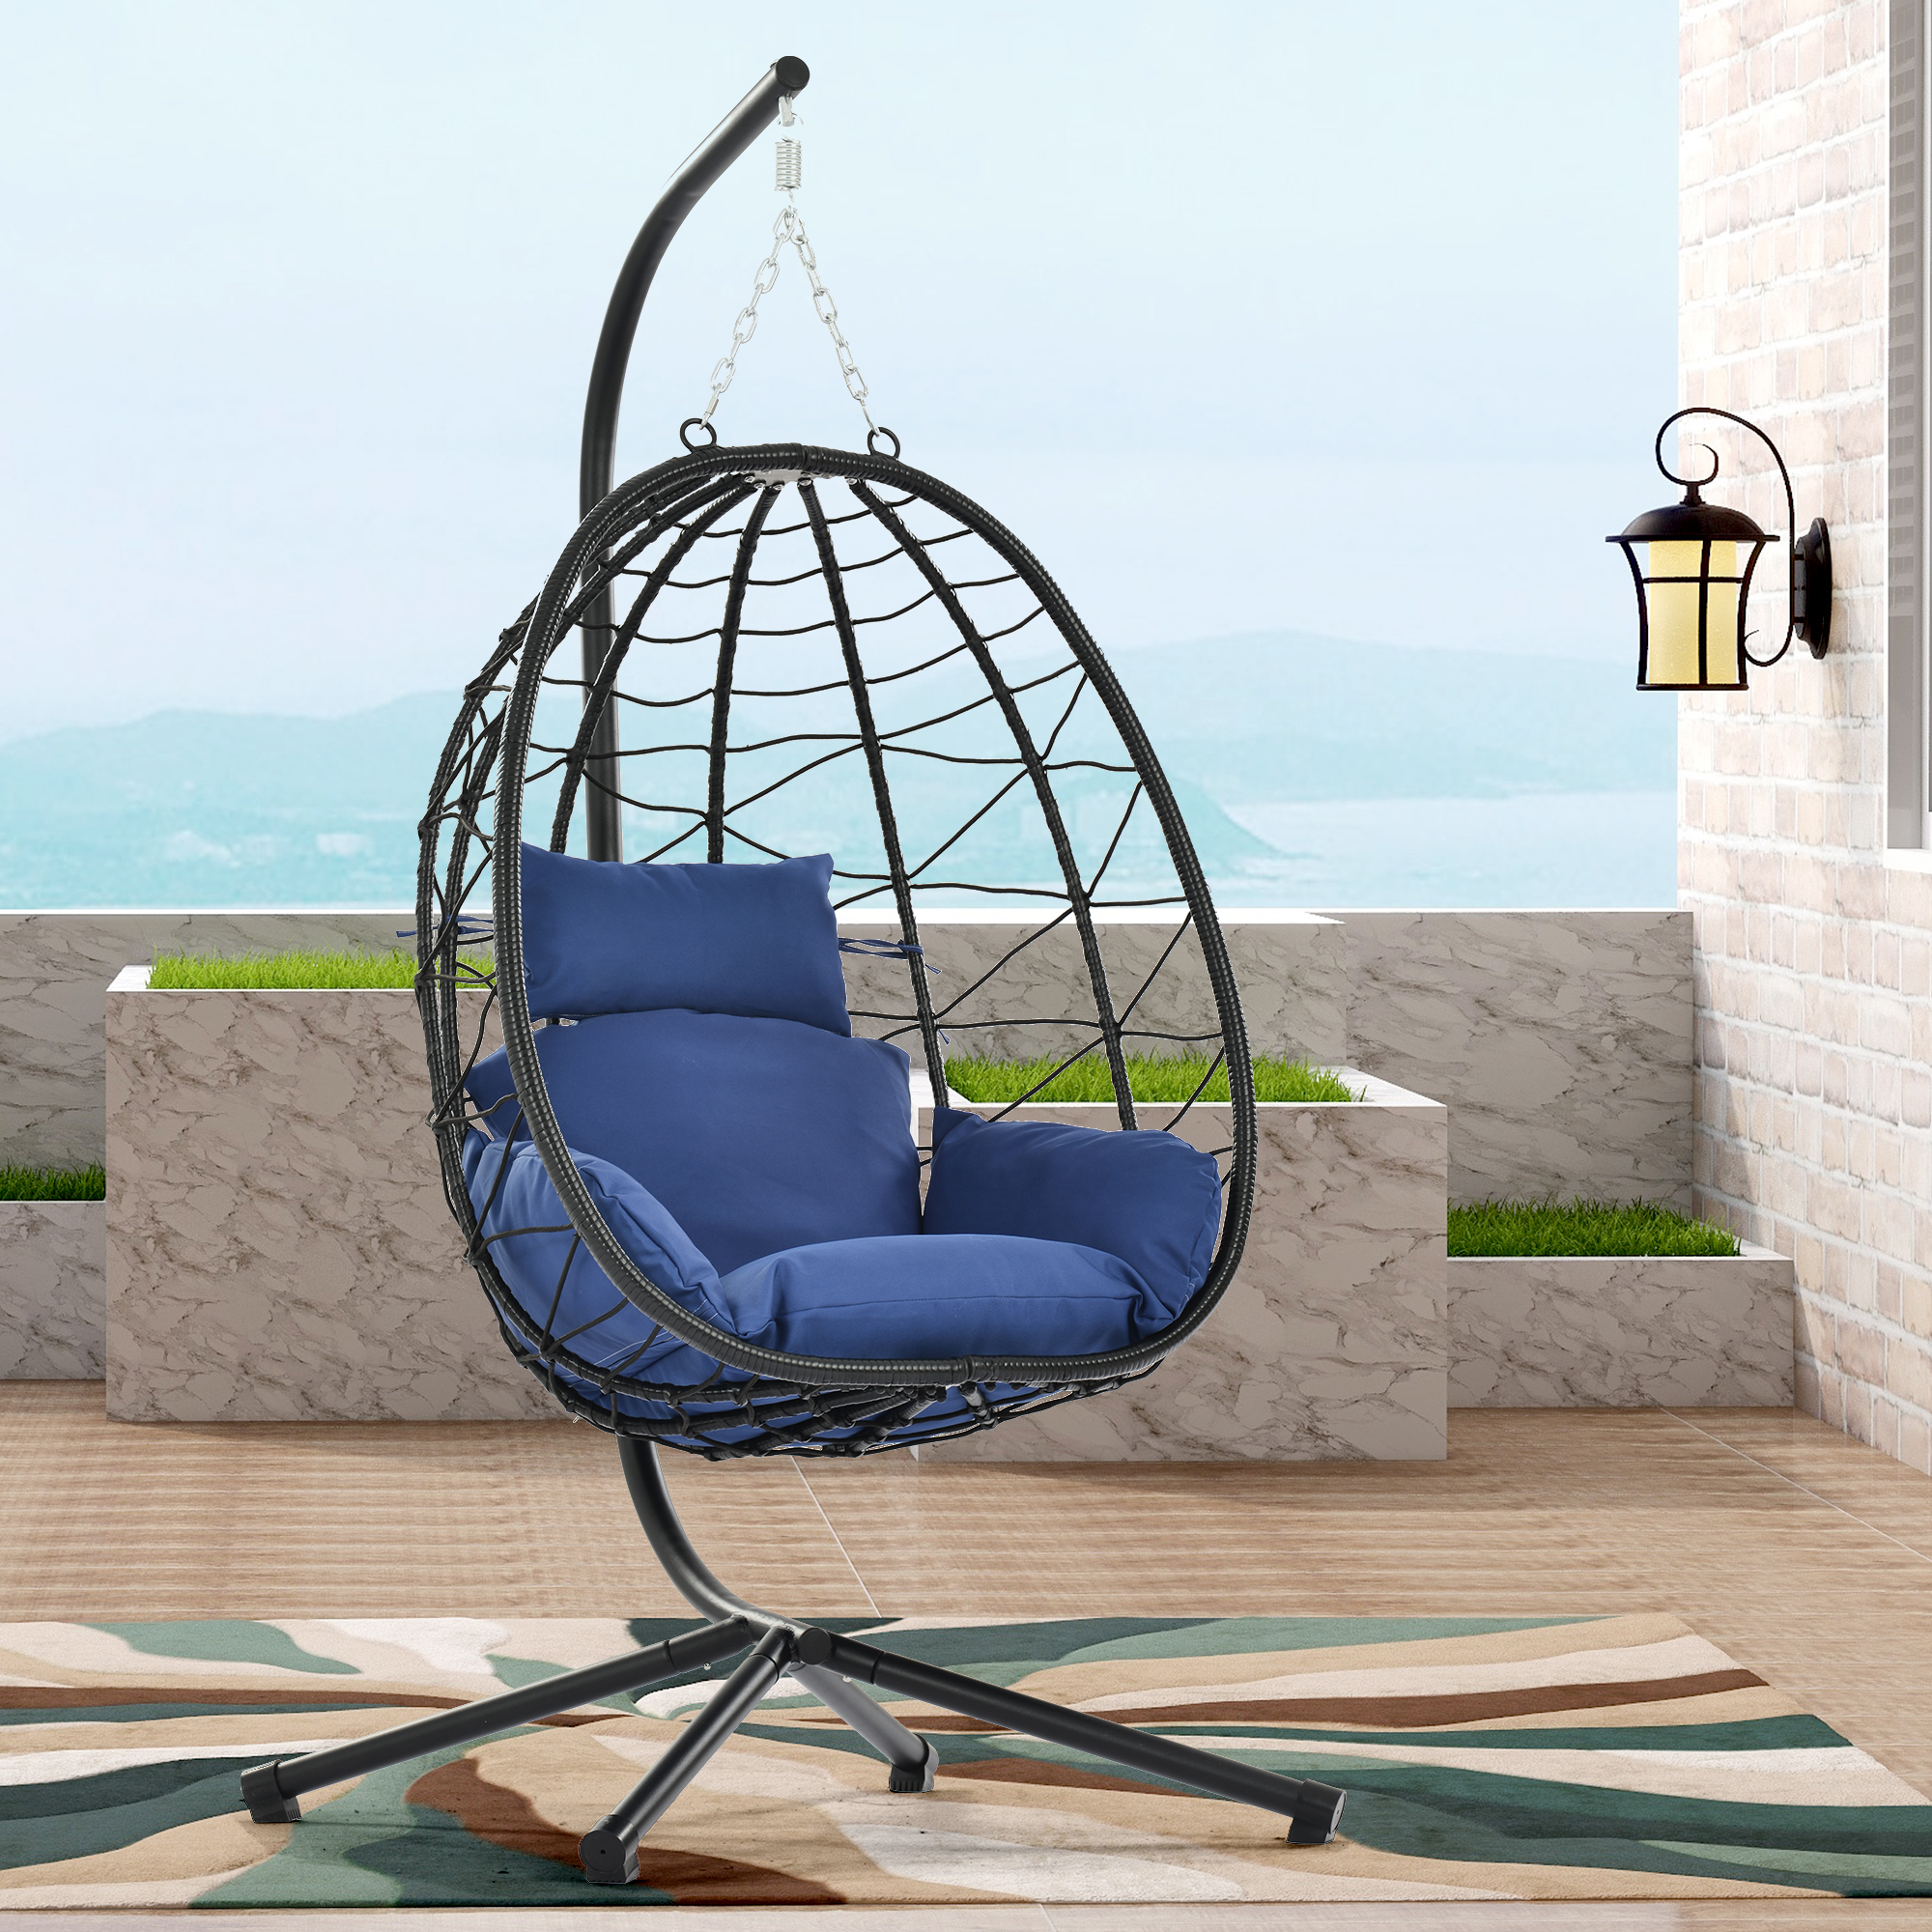 Egg Chair with Stand Indoor Outdoor Swing Chair Patio Wicker Hanging Egg Chair Hanging Basket Chair Hammock Chair with Stand for Bedroom Living Room Balcony-Boyel Living